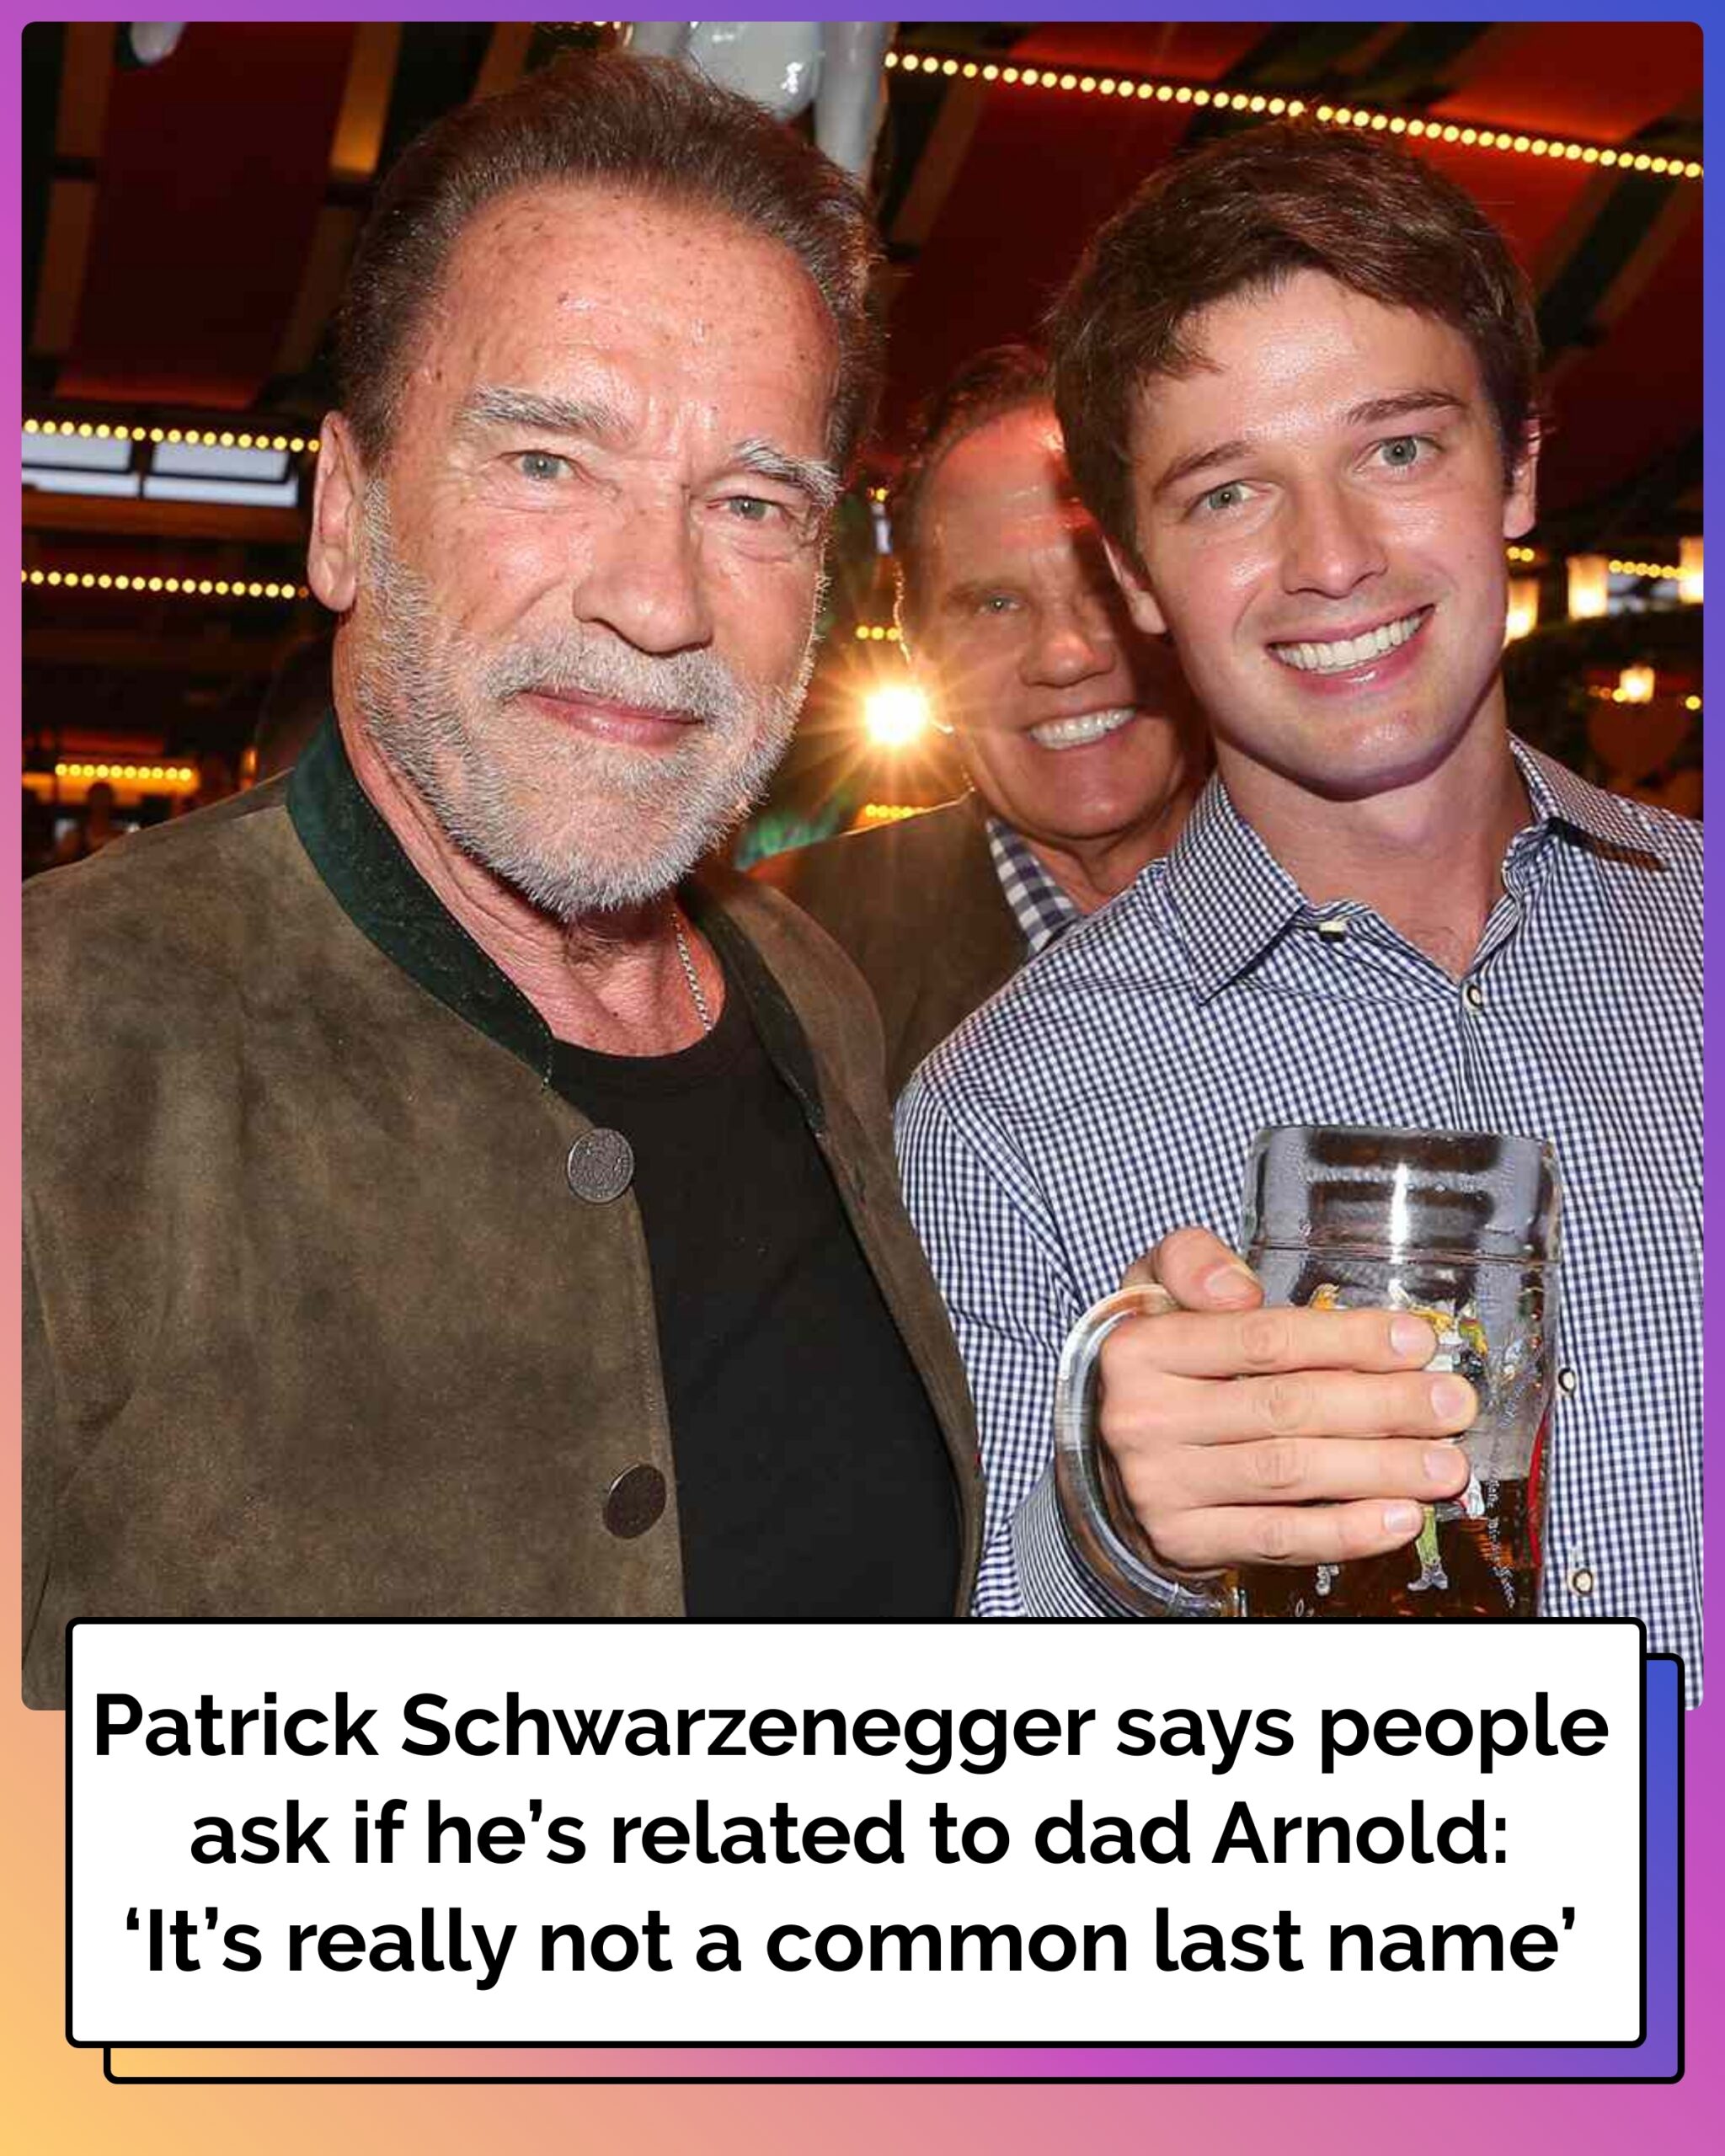 Patrick Schwarzenegger Says People Ask If He’s Related to Dad Arnold: ‘It’s Really Not a Common Last Name’